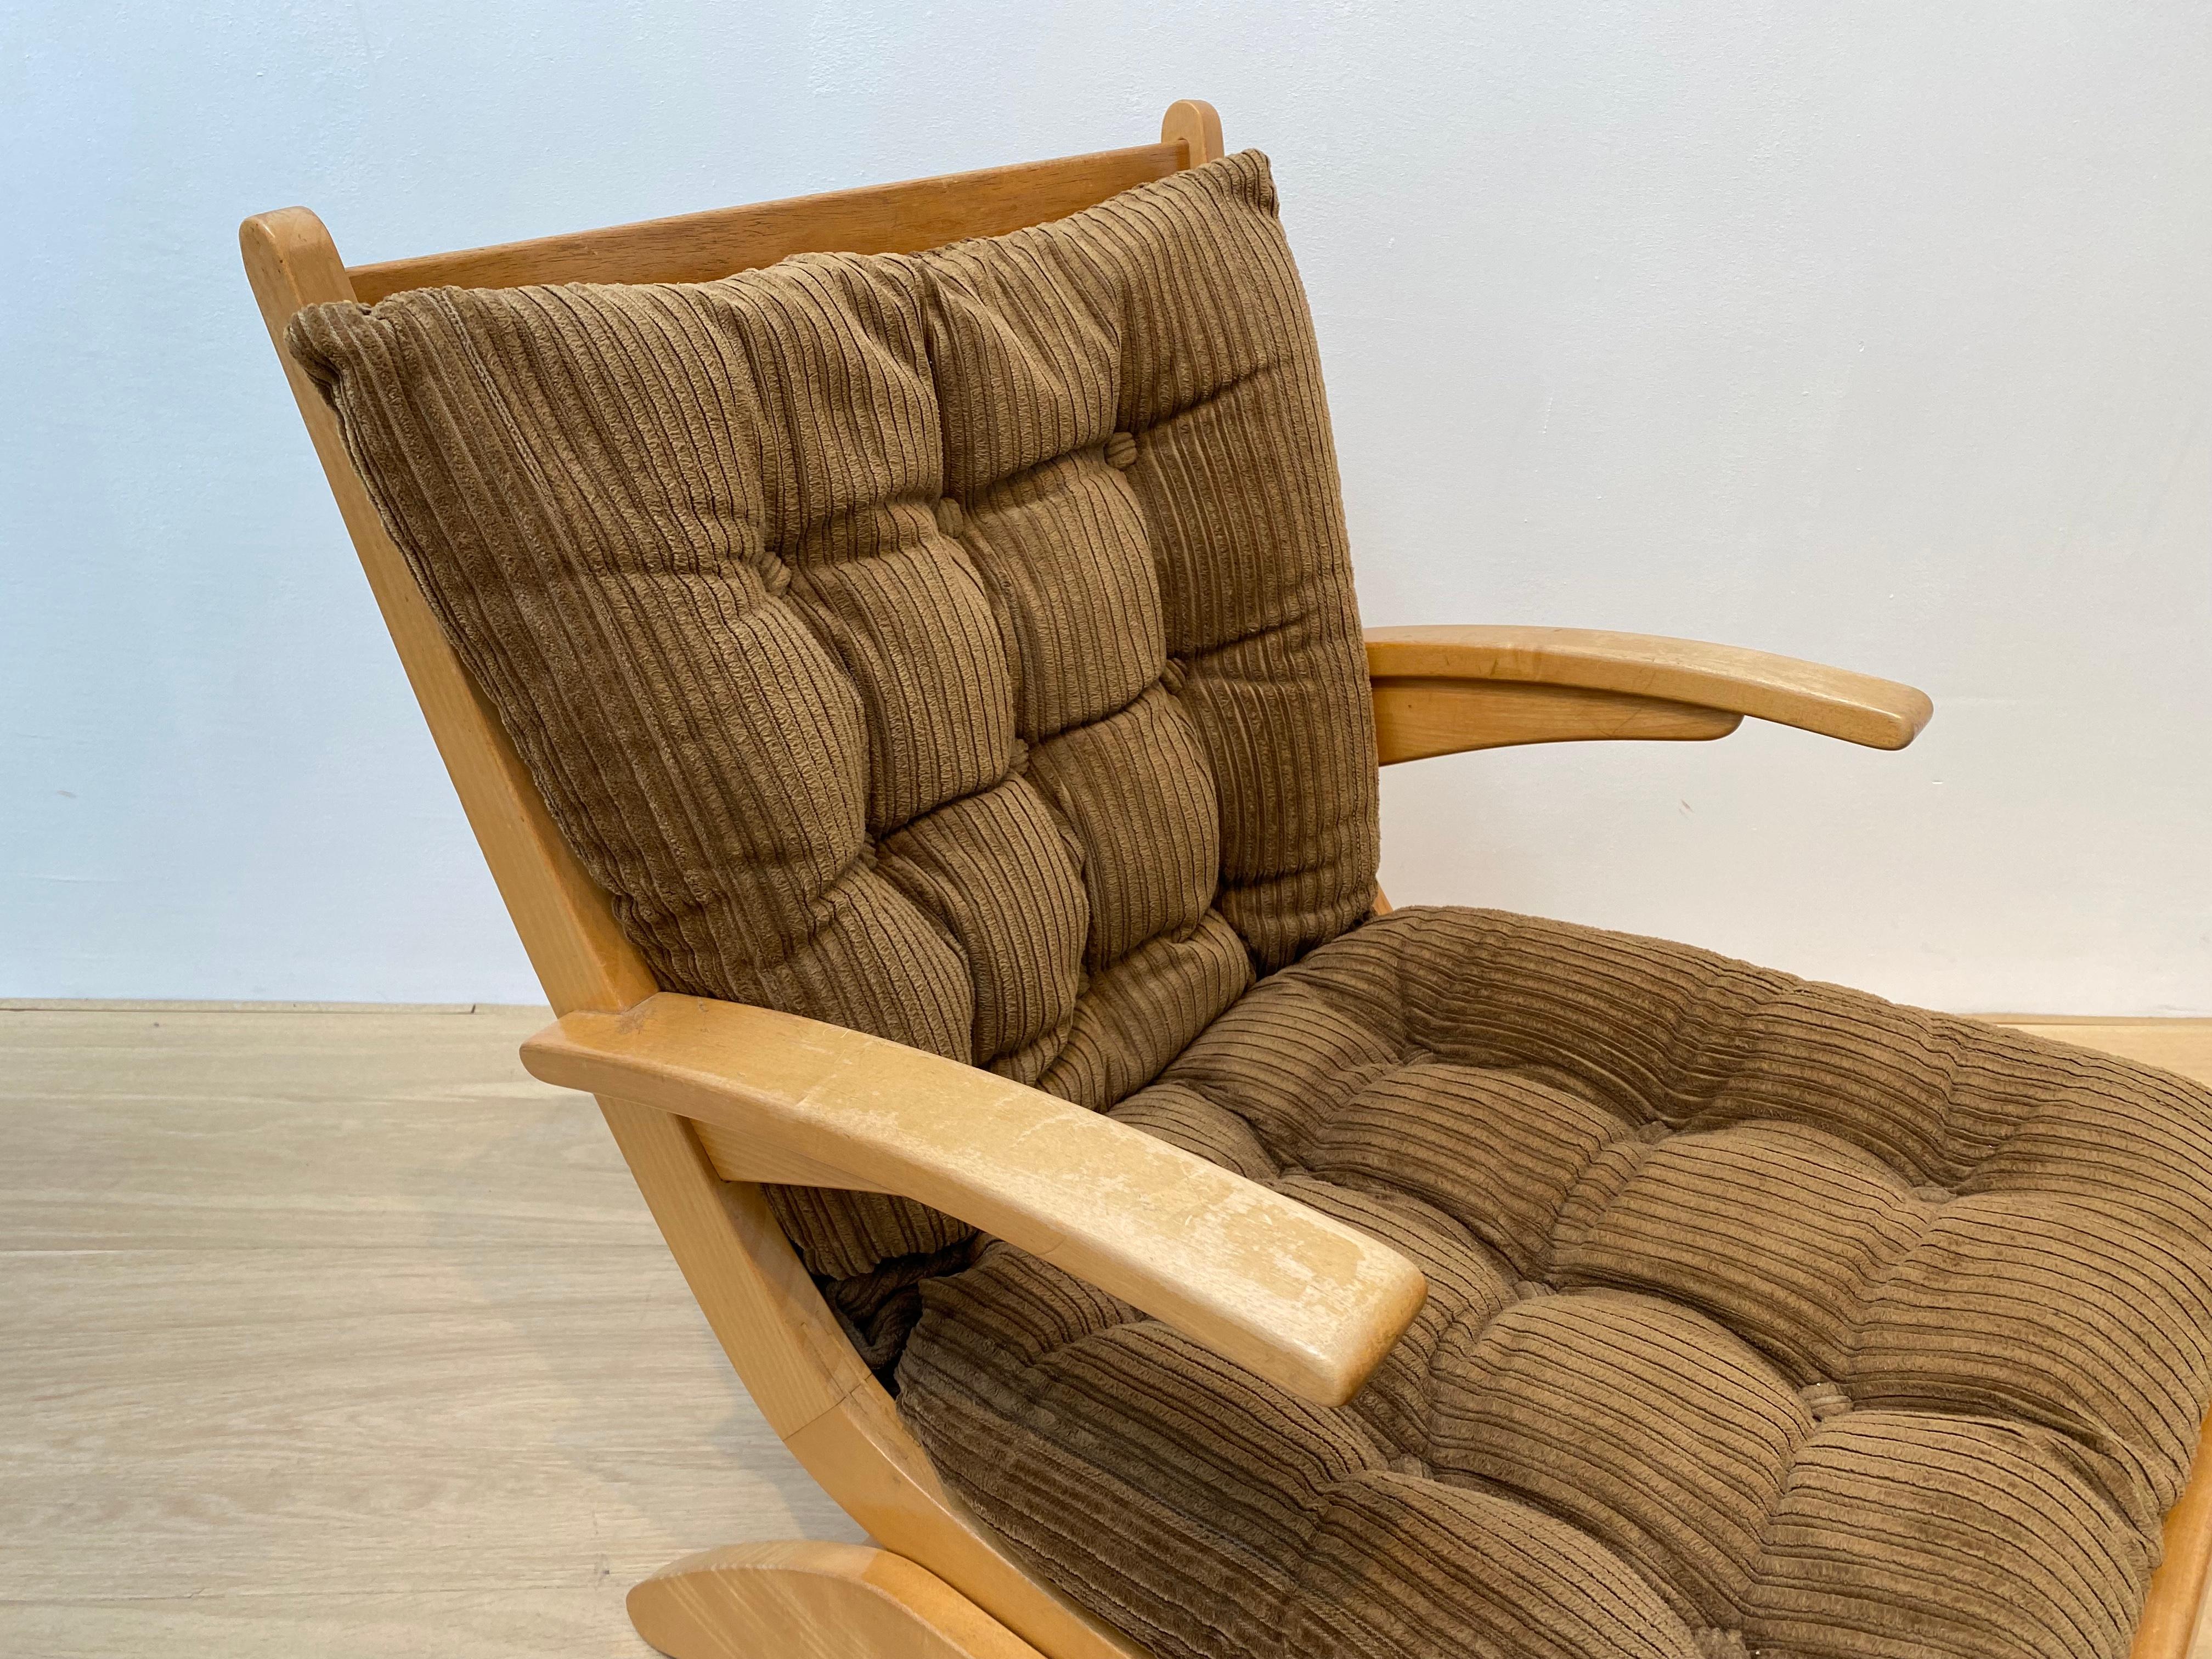 Mid-20th Century Dutch Modern Armchair by Jan den Drijver, The Netherlands 1950s for Jess